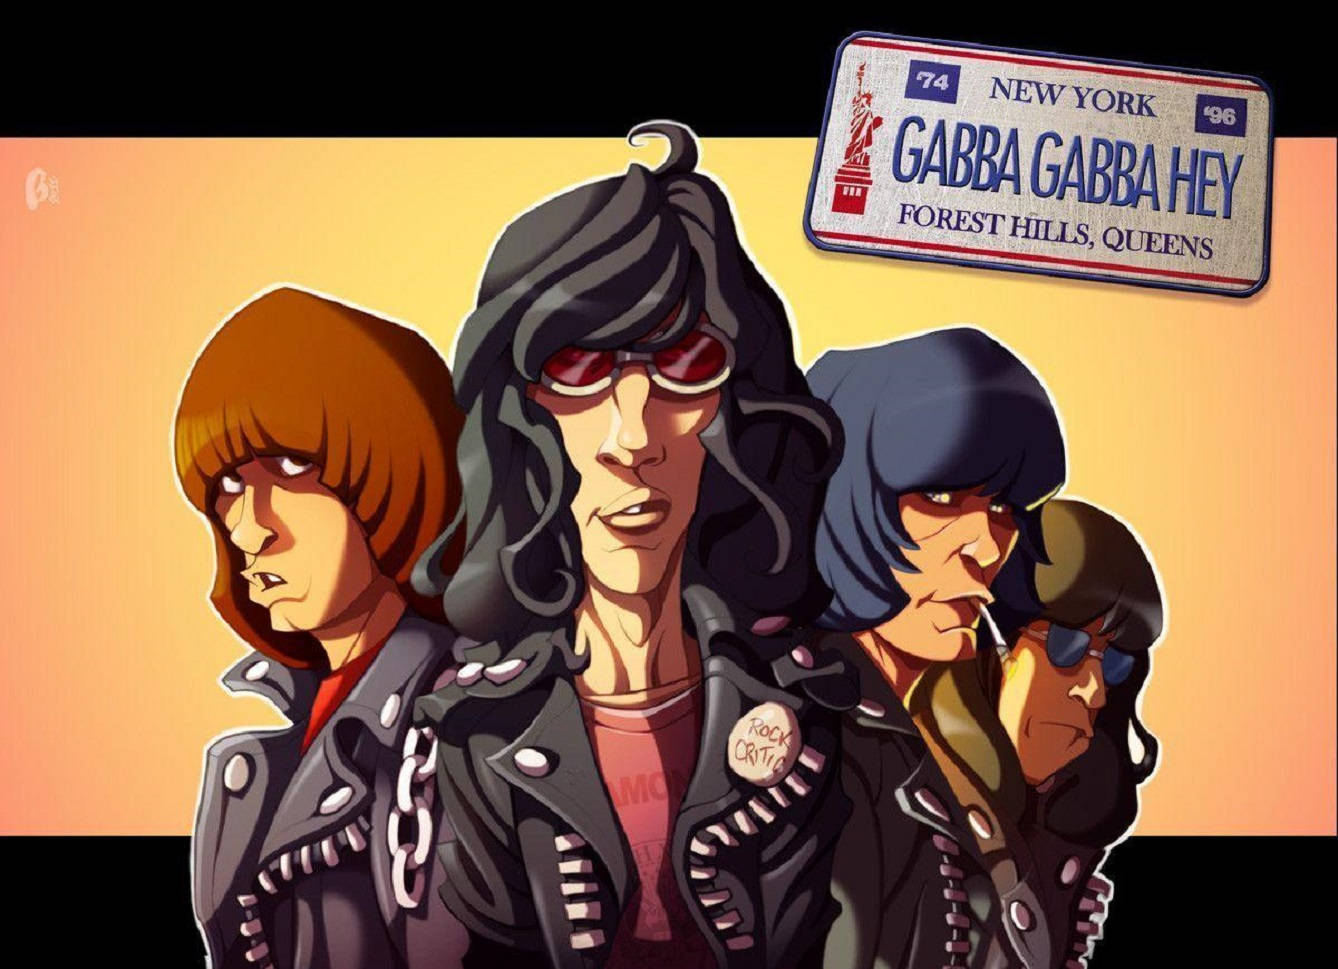 Gabba Gabba Hey: An anthology of fiction inspired by the music of The  Ramones